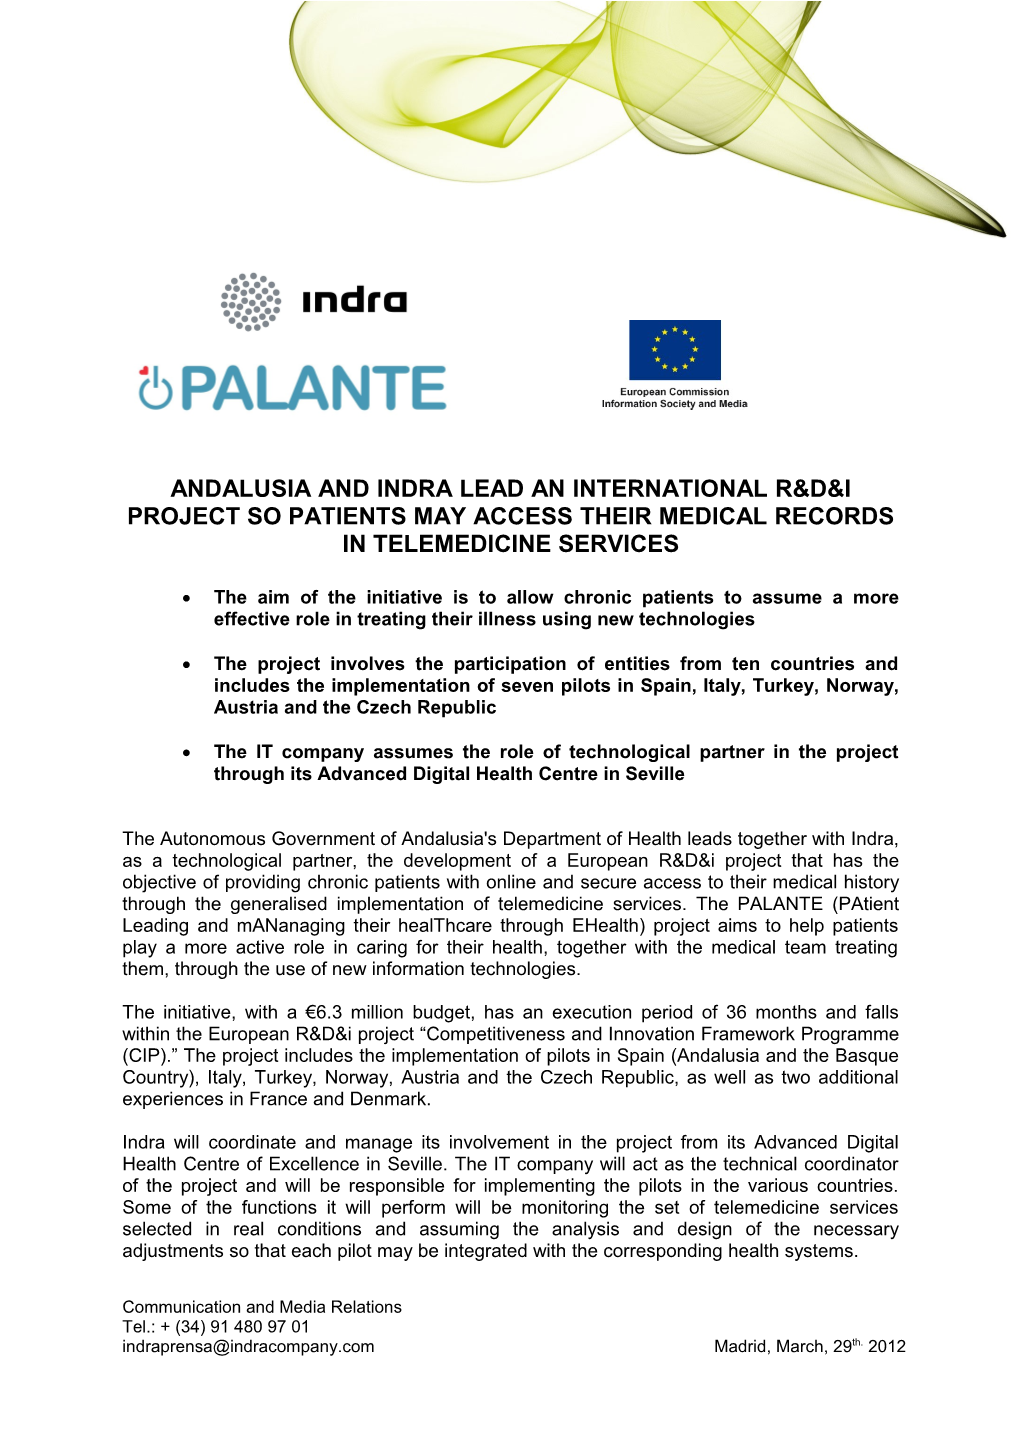 Andalusia and Indra Lead an International R&D&I Project So Patients May Access Their Medical